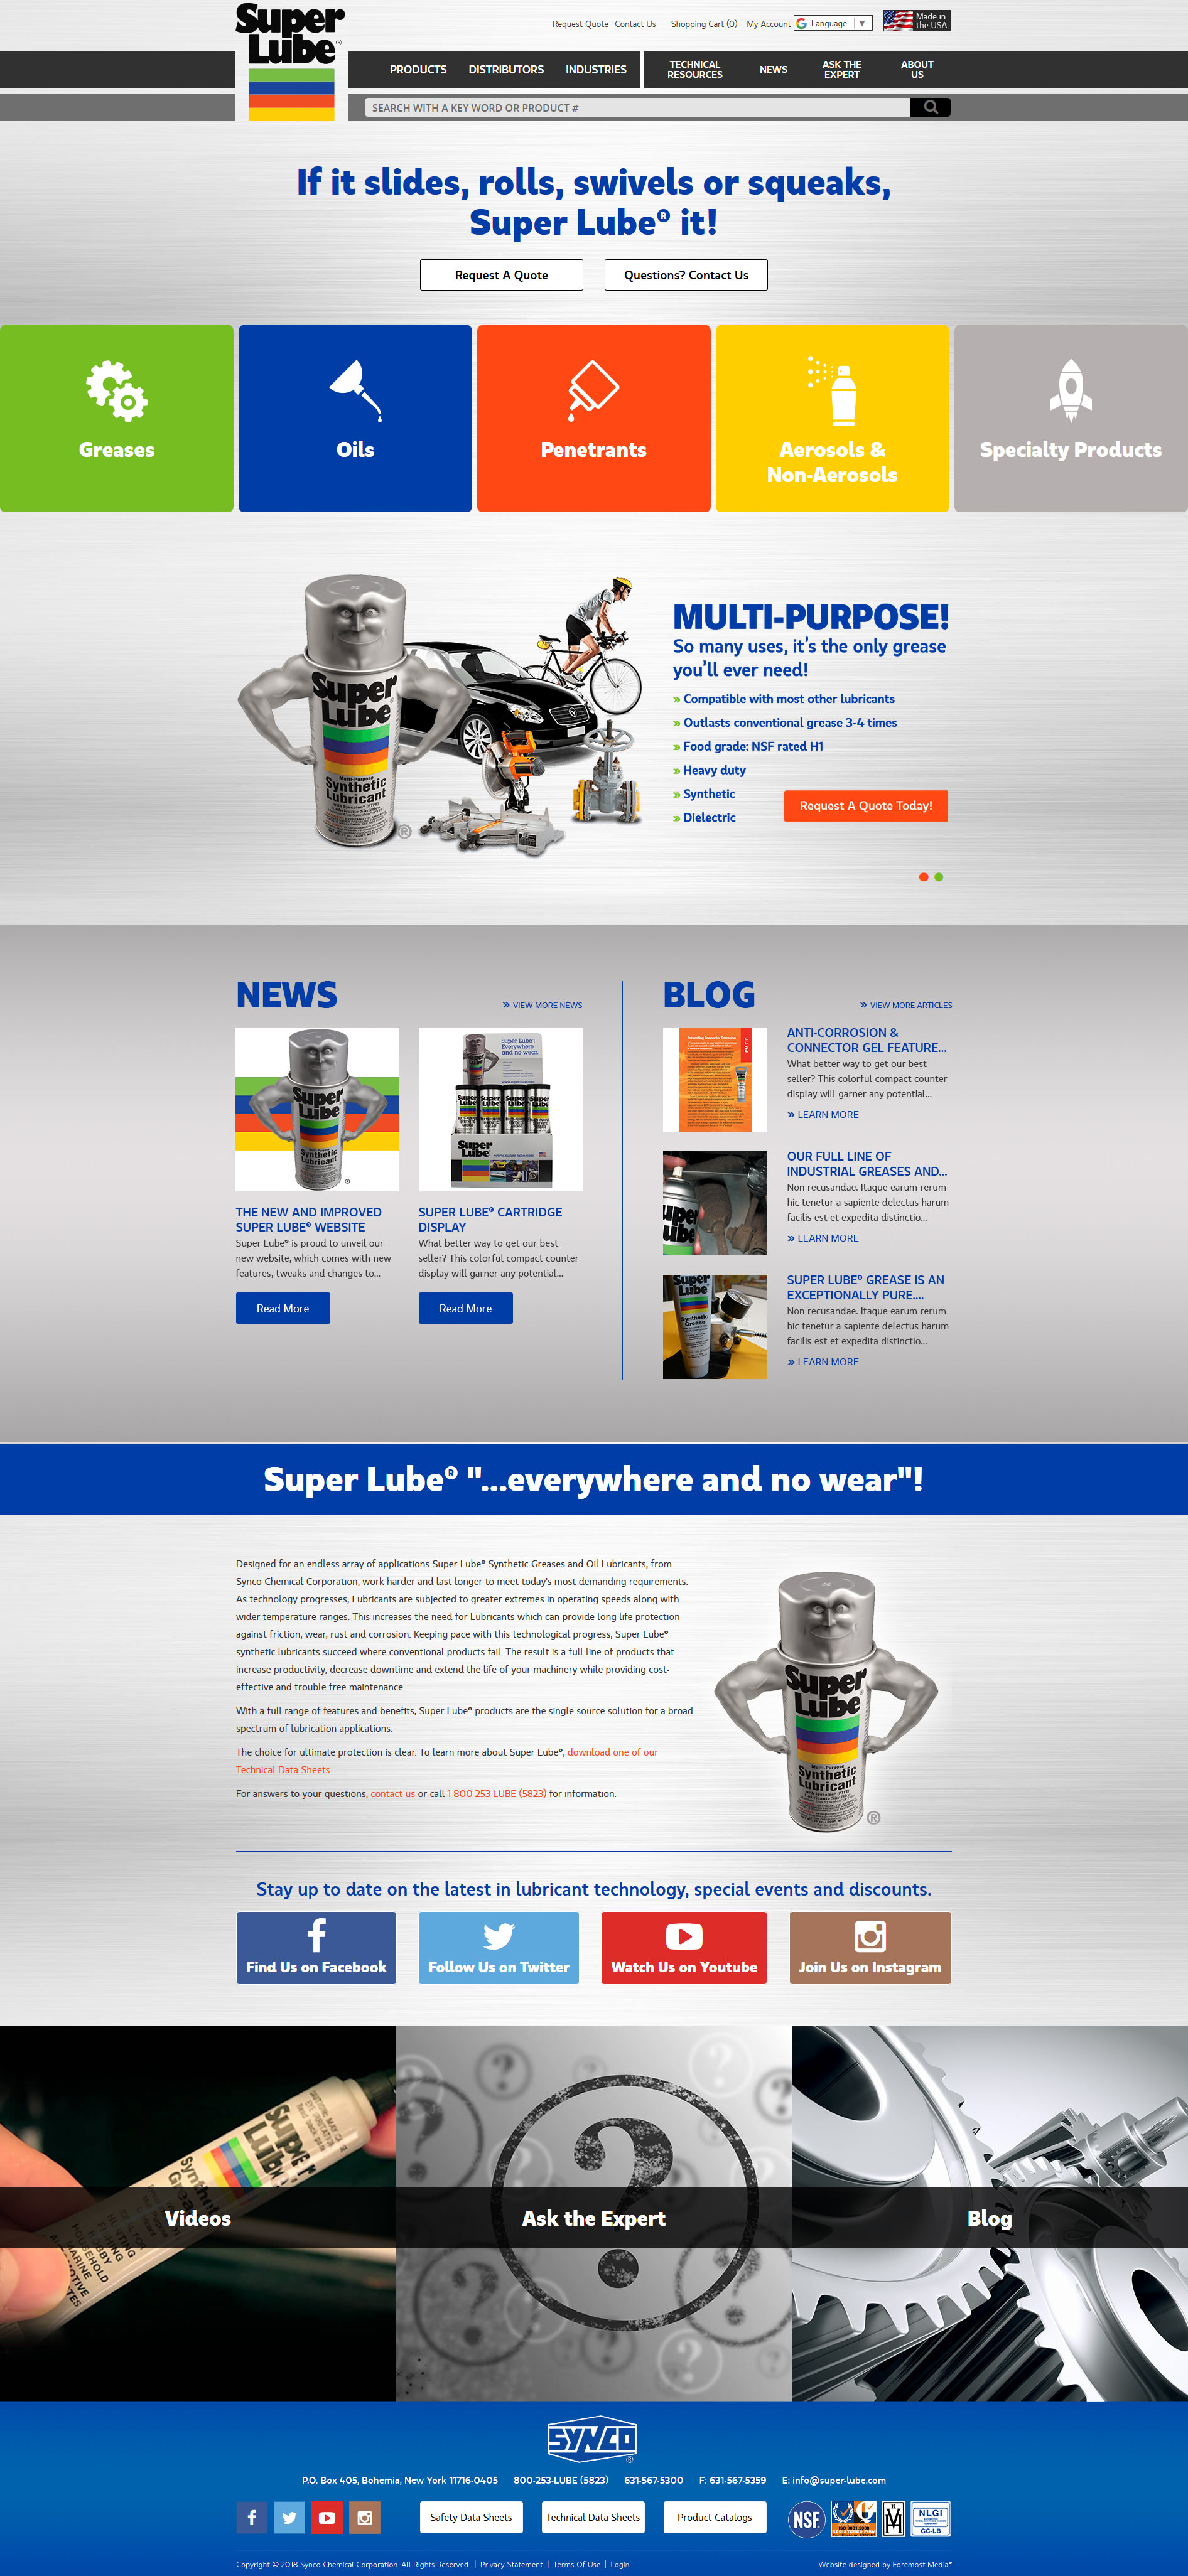 Example of the new and improved nopCommerce website designed by Foremost Media for Super Lube